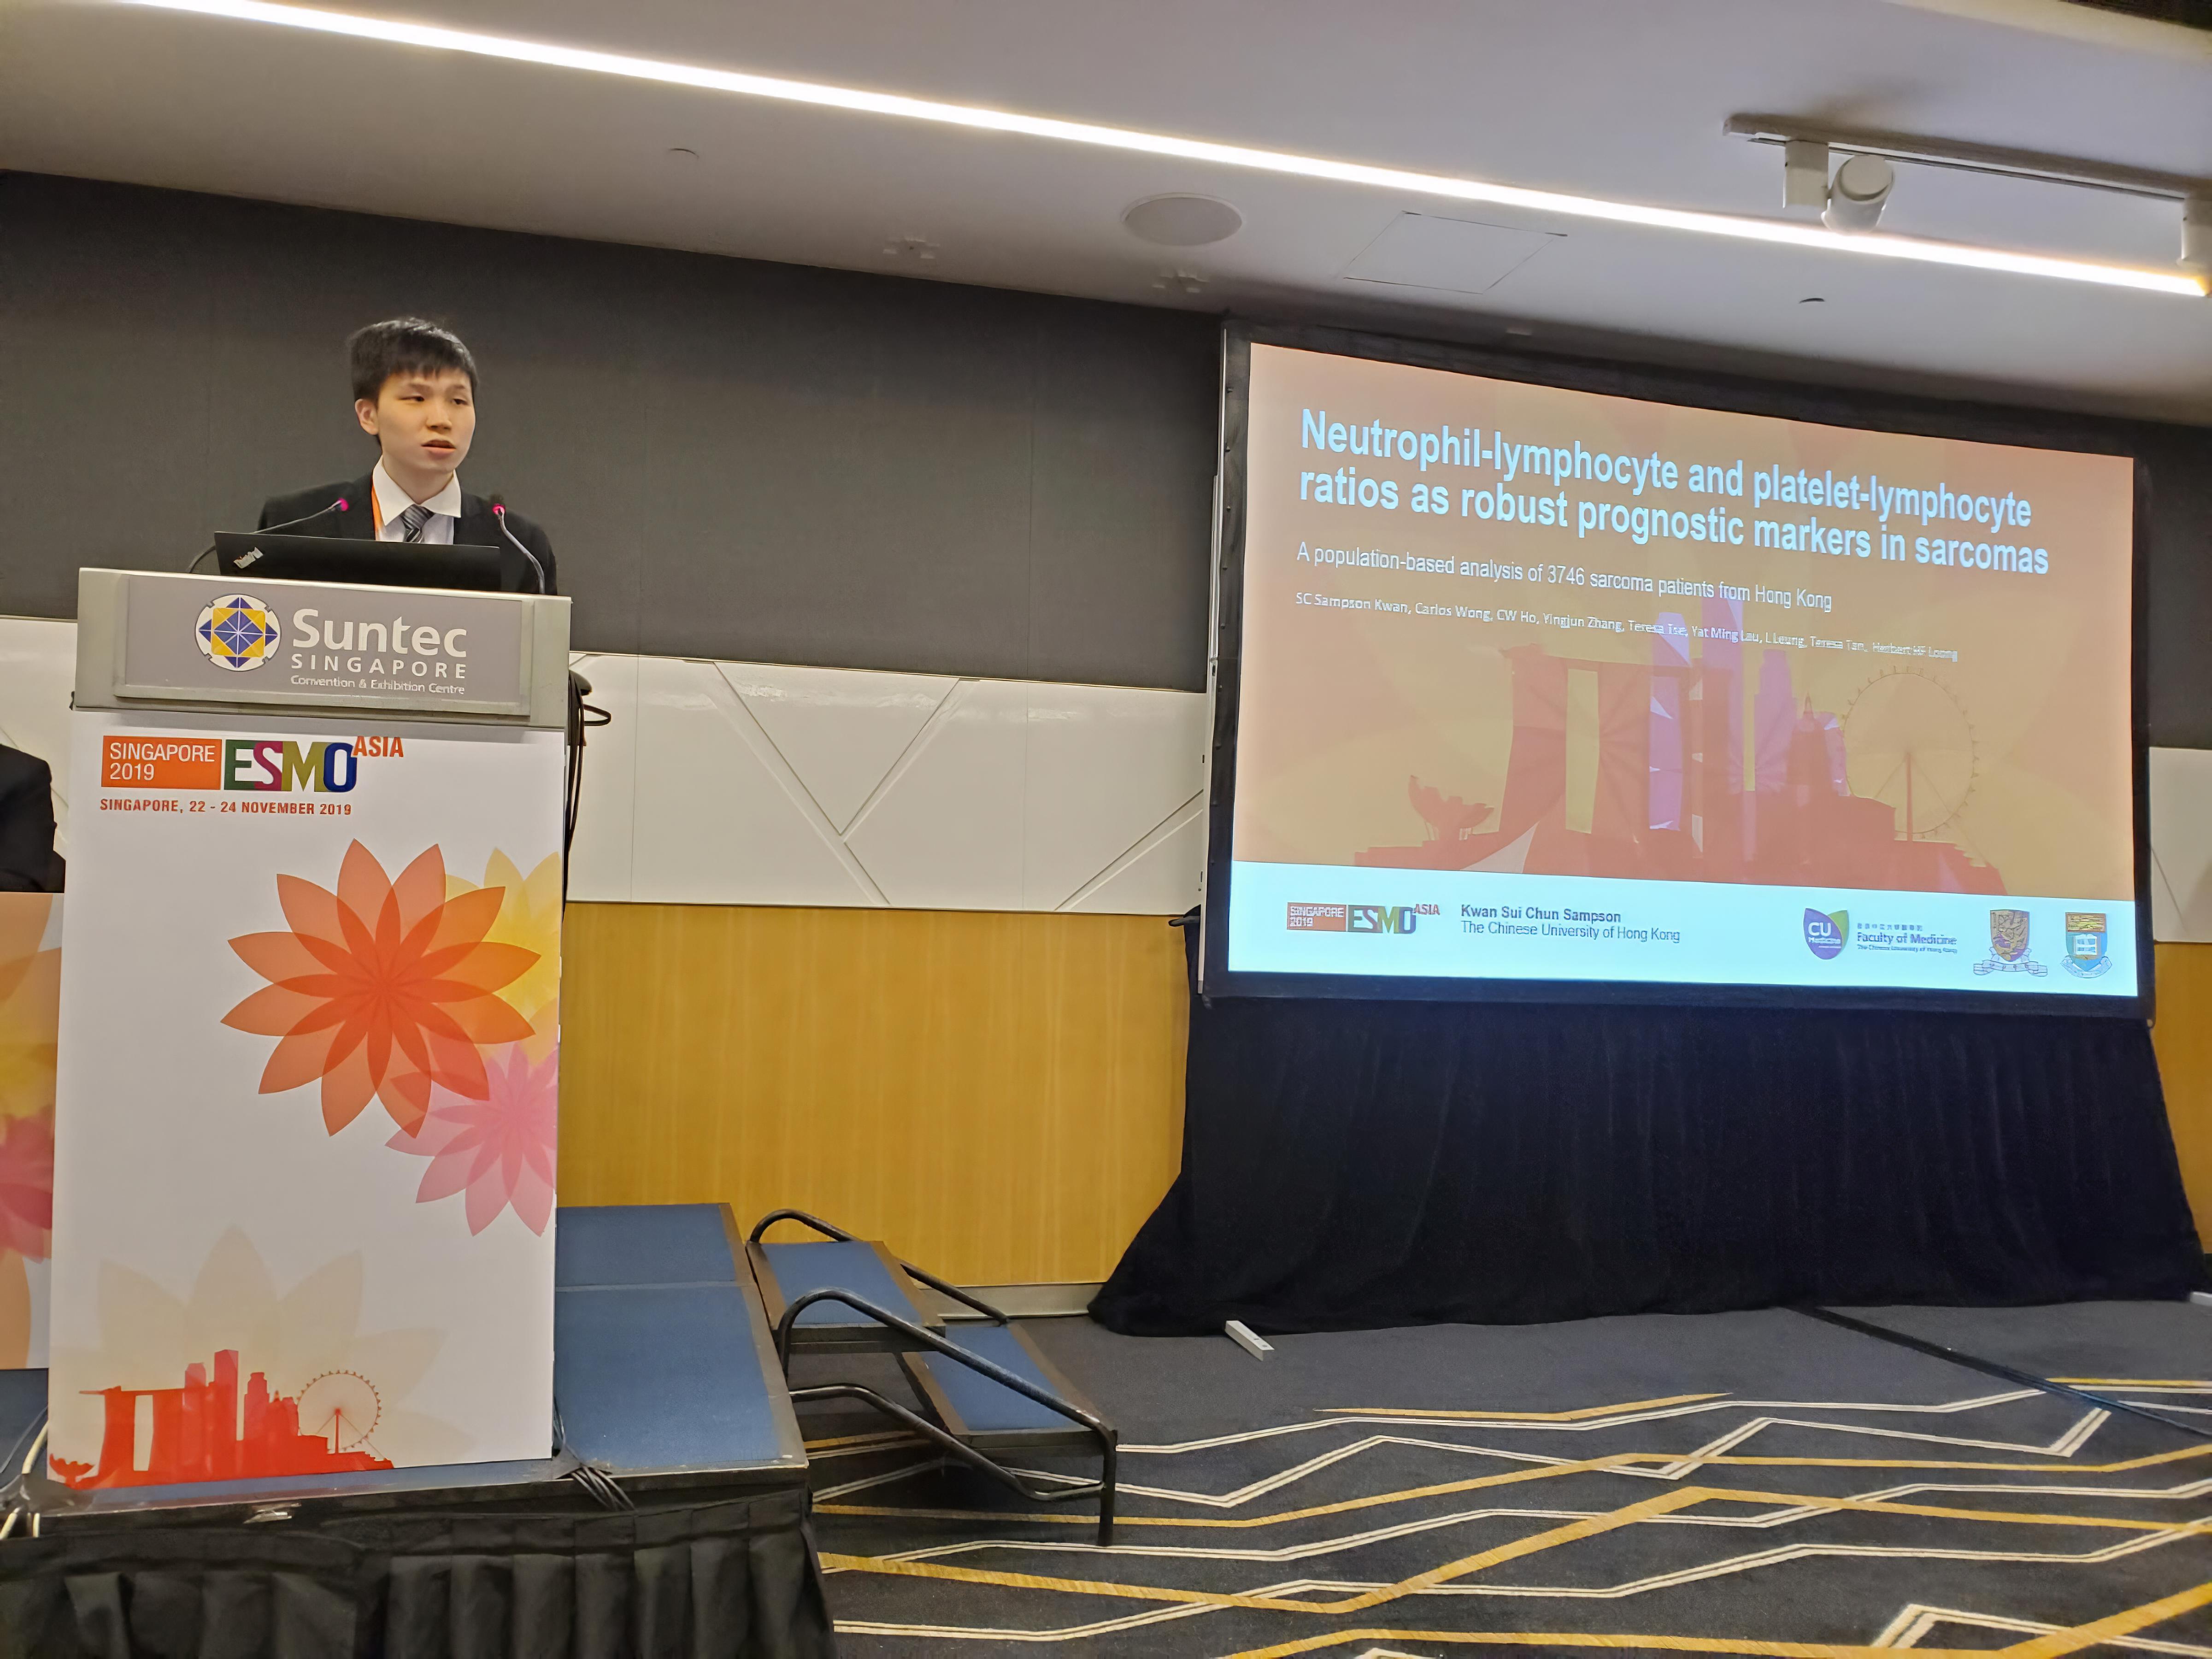 Sampson presents his abstract of an oncology study at the Medical Oncology (ESMO) Asia Congress 2019.